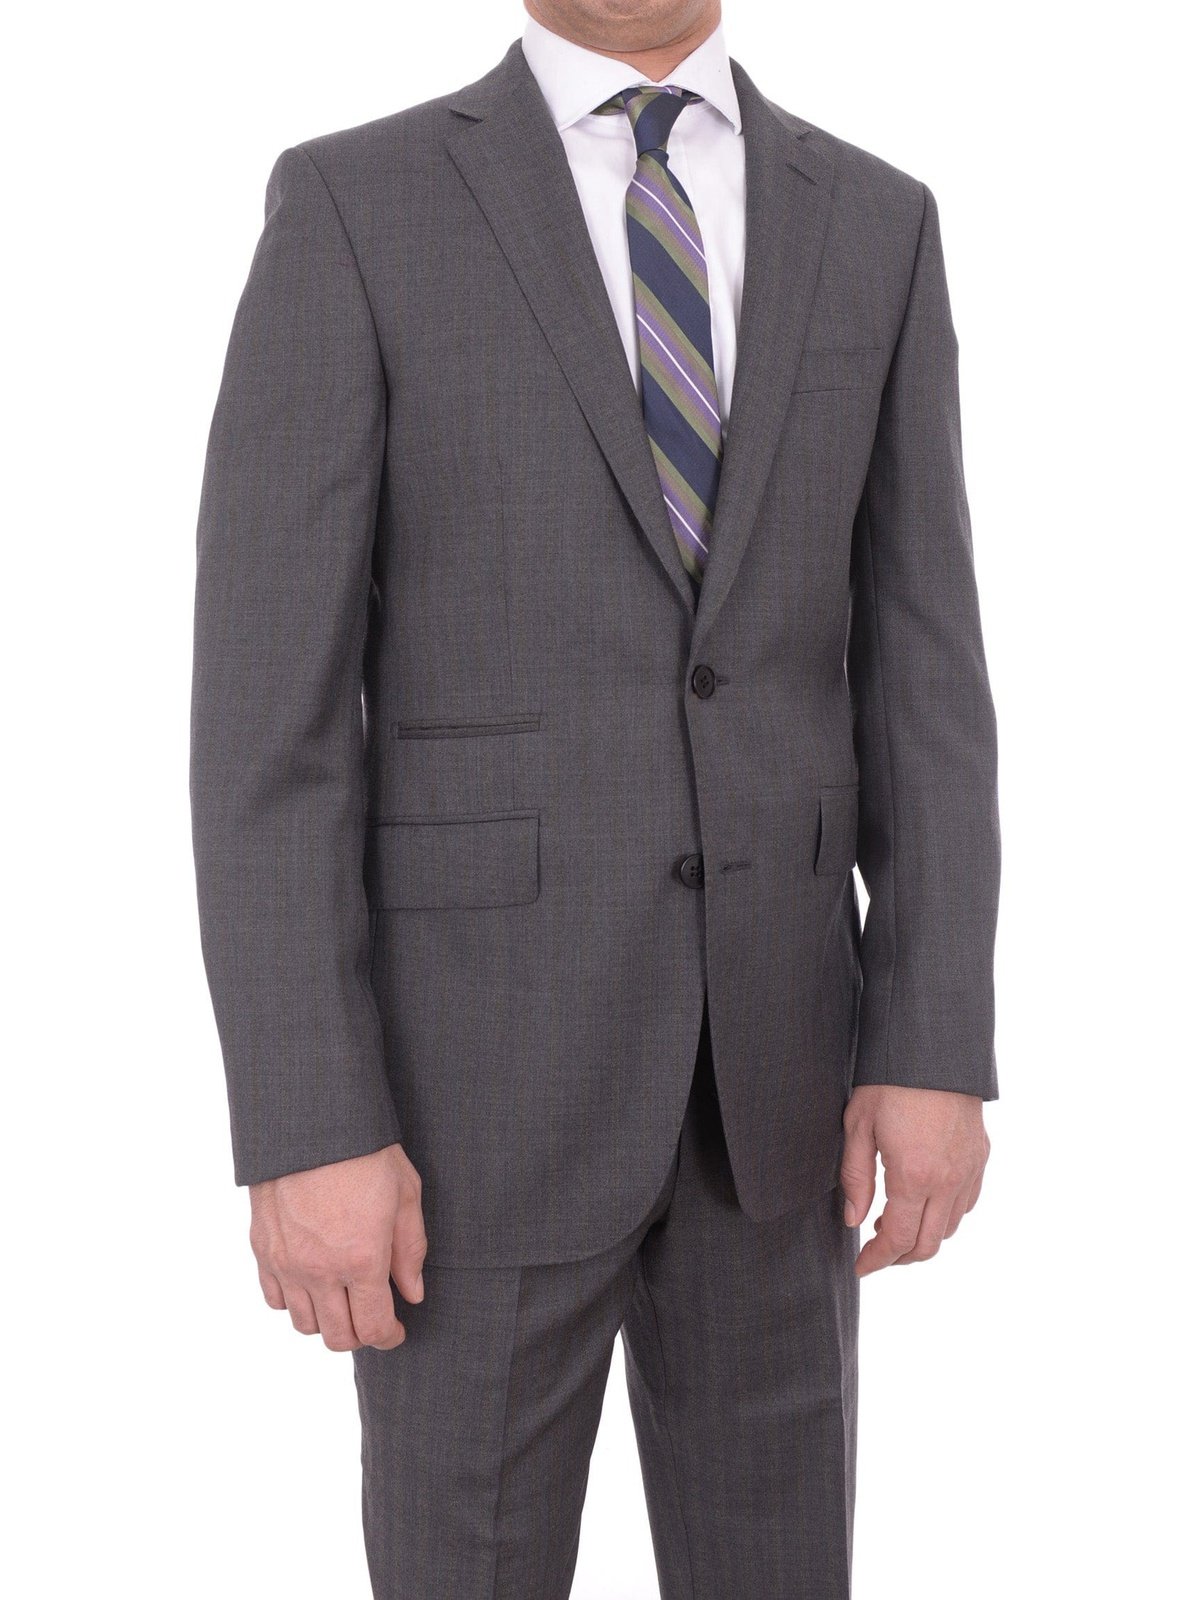 Napoli TWO PIECE SUITS Mens Napoli Slim Fit Heather Gray Half Canvassed Wool Suit Ticket Pocket